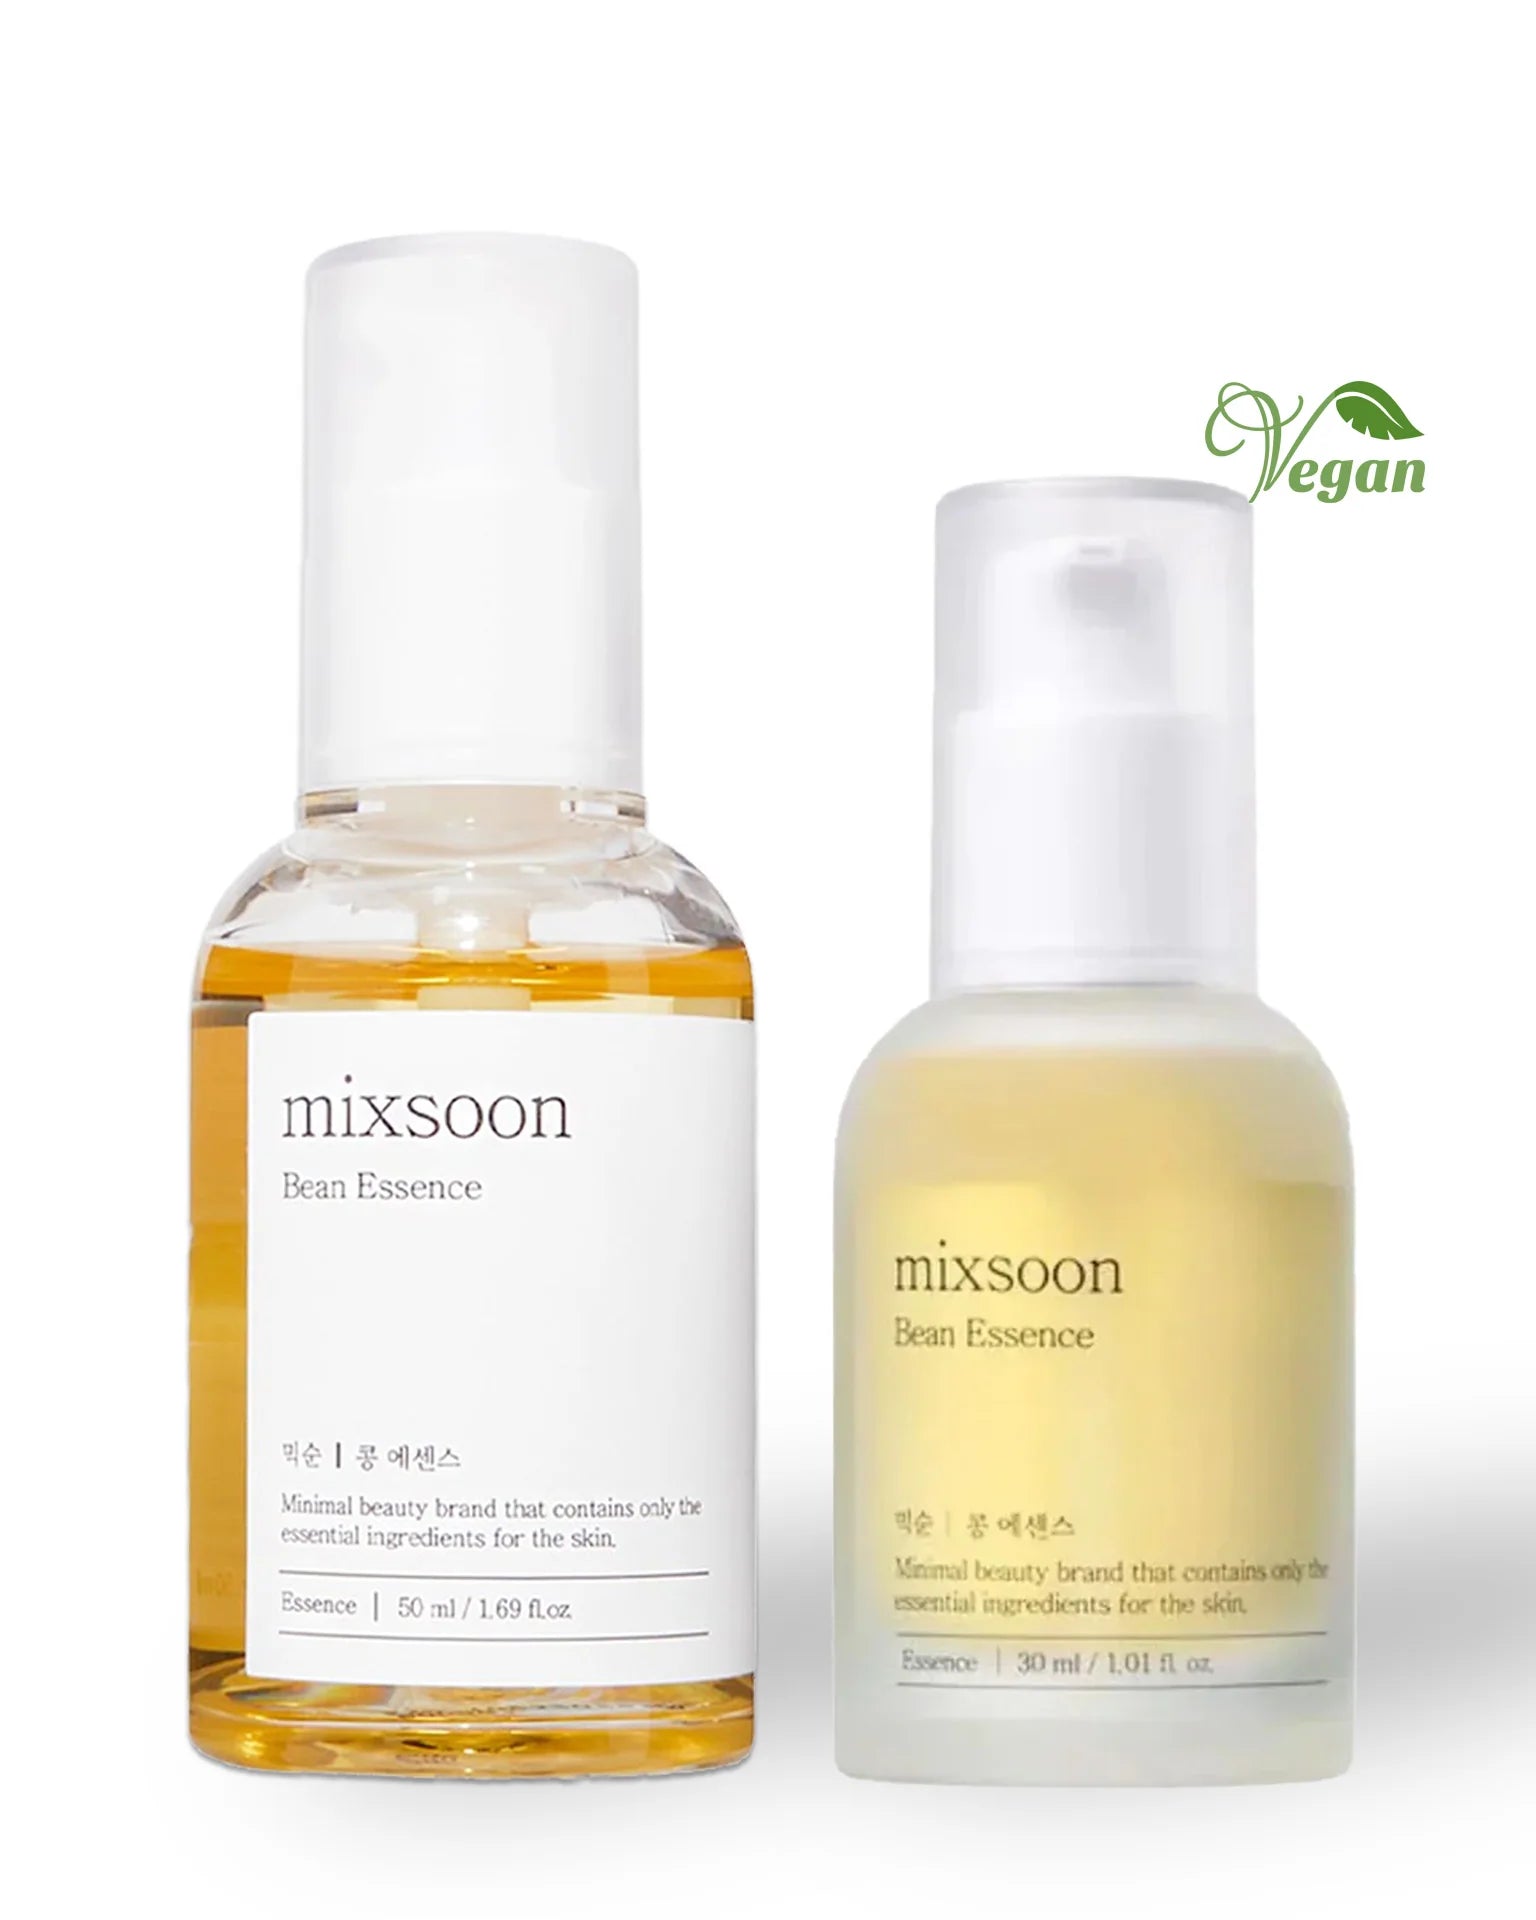 Mixsoon Bean Essence Exfoliating and Hydrating